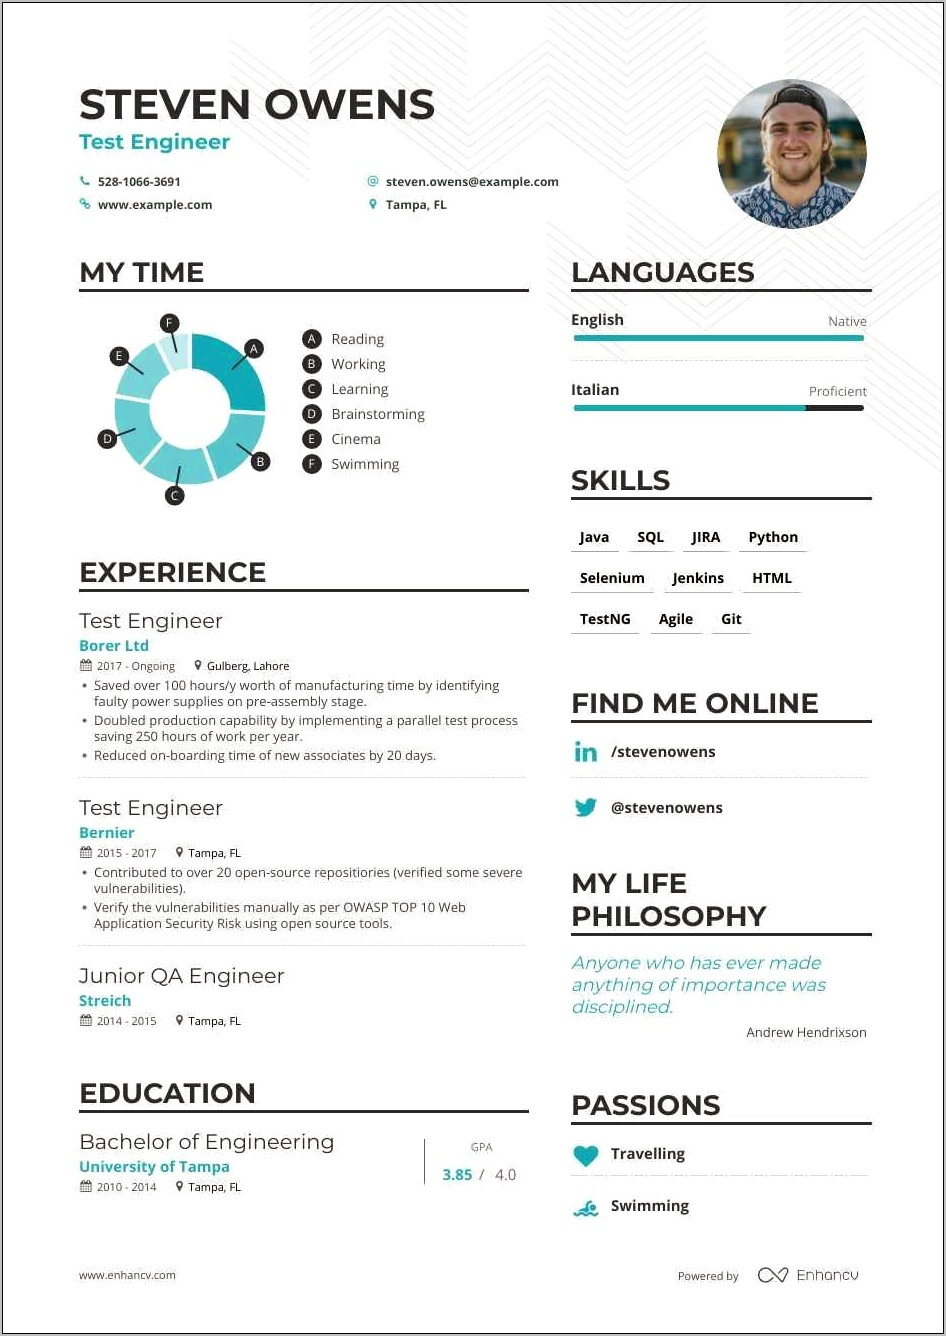 5 Years Experience Resume In Testing